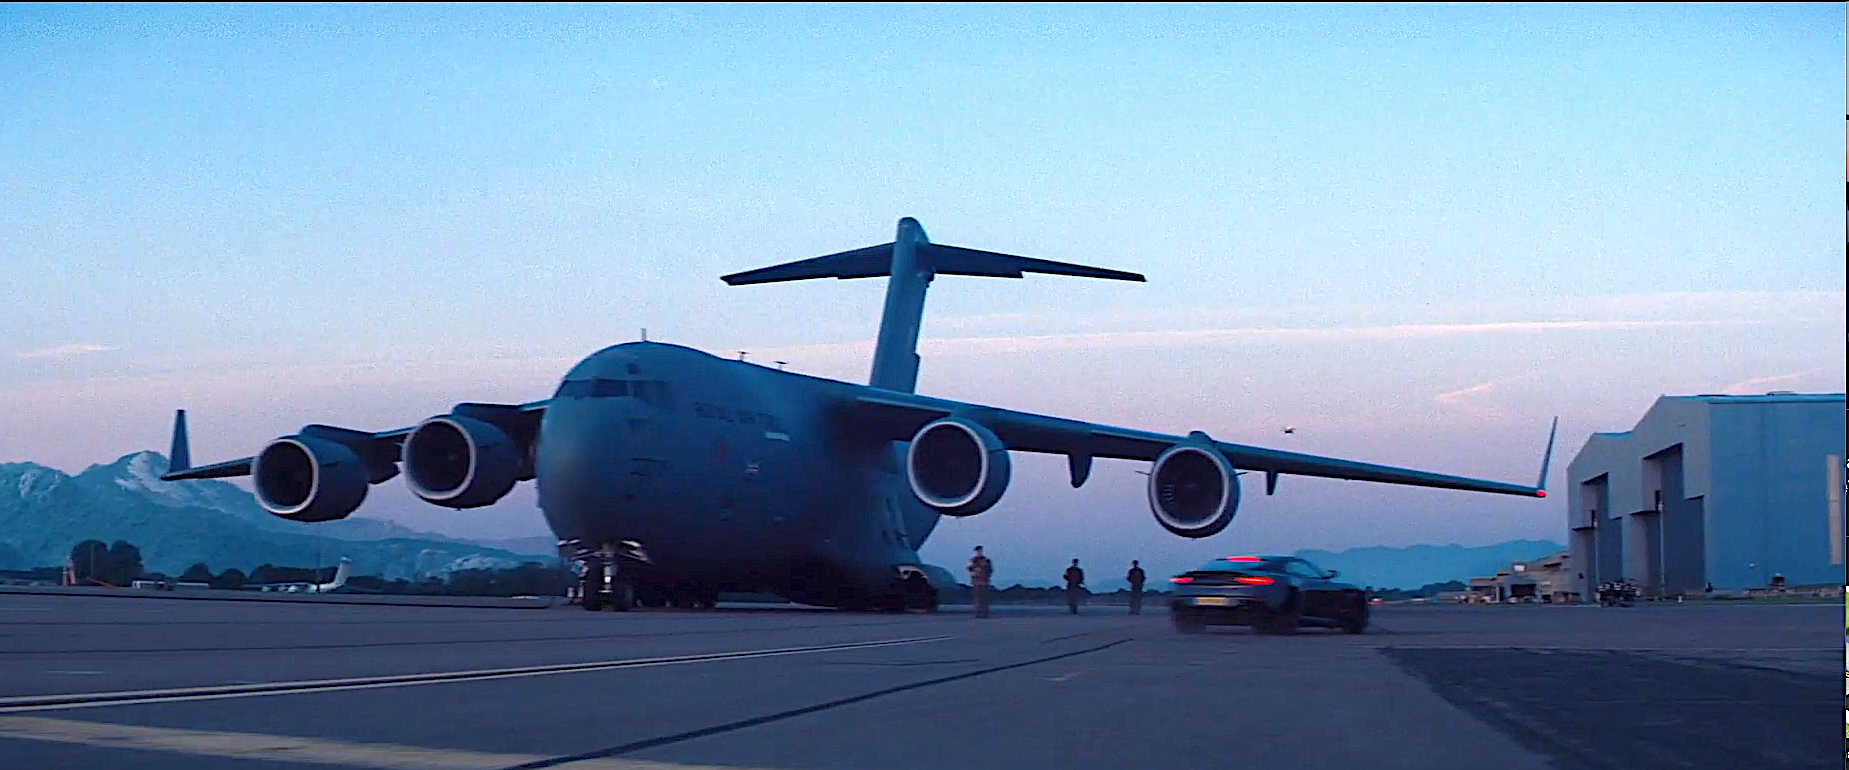 The C-17 Globemaster on the runway with sports car driving past.